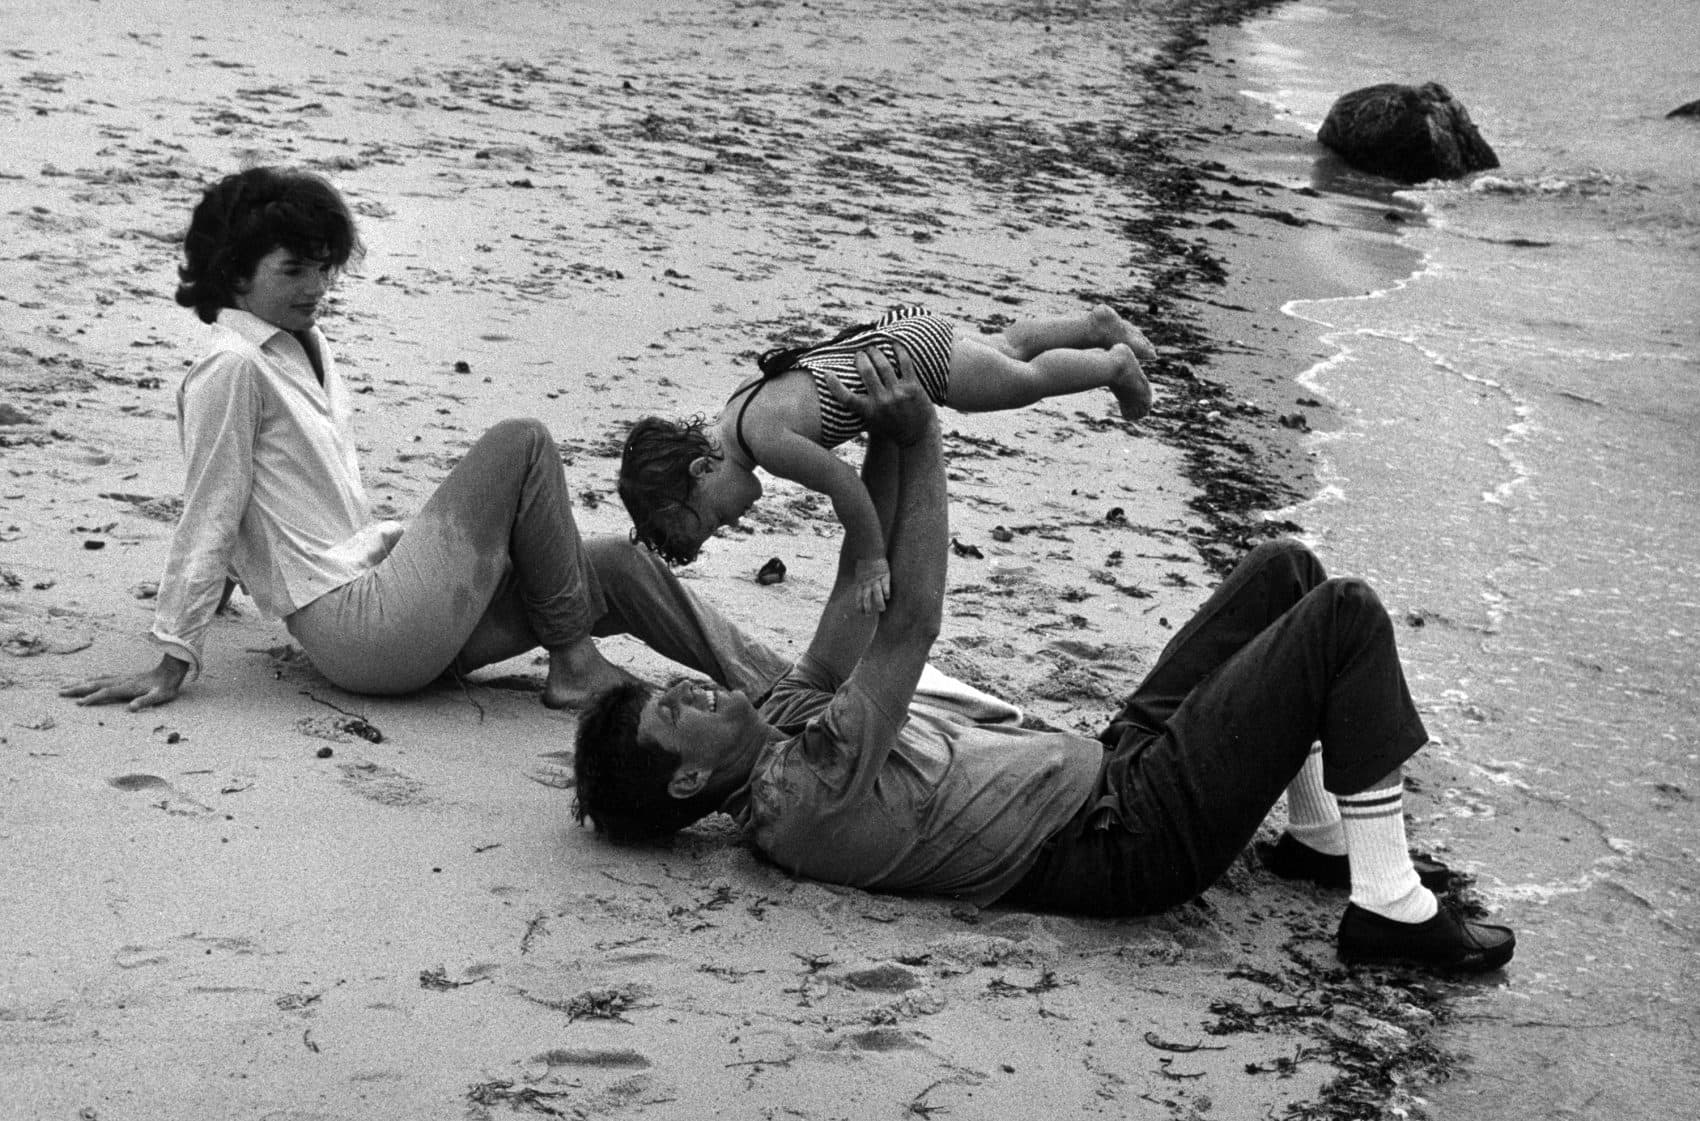 Jacqueline Bouvier Kennedy and John F. Kennedy, who is holding Caroline Kennedy, on a beach in Hyannis Port, Mass. (Courtesy Mark Shaw/John F. Kennedy Presidential Library and Museum in Boston)